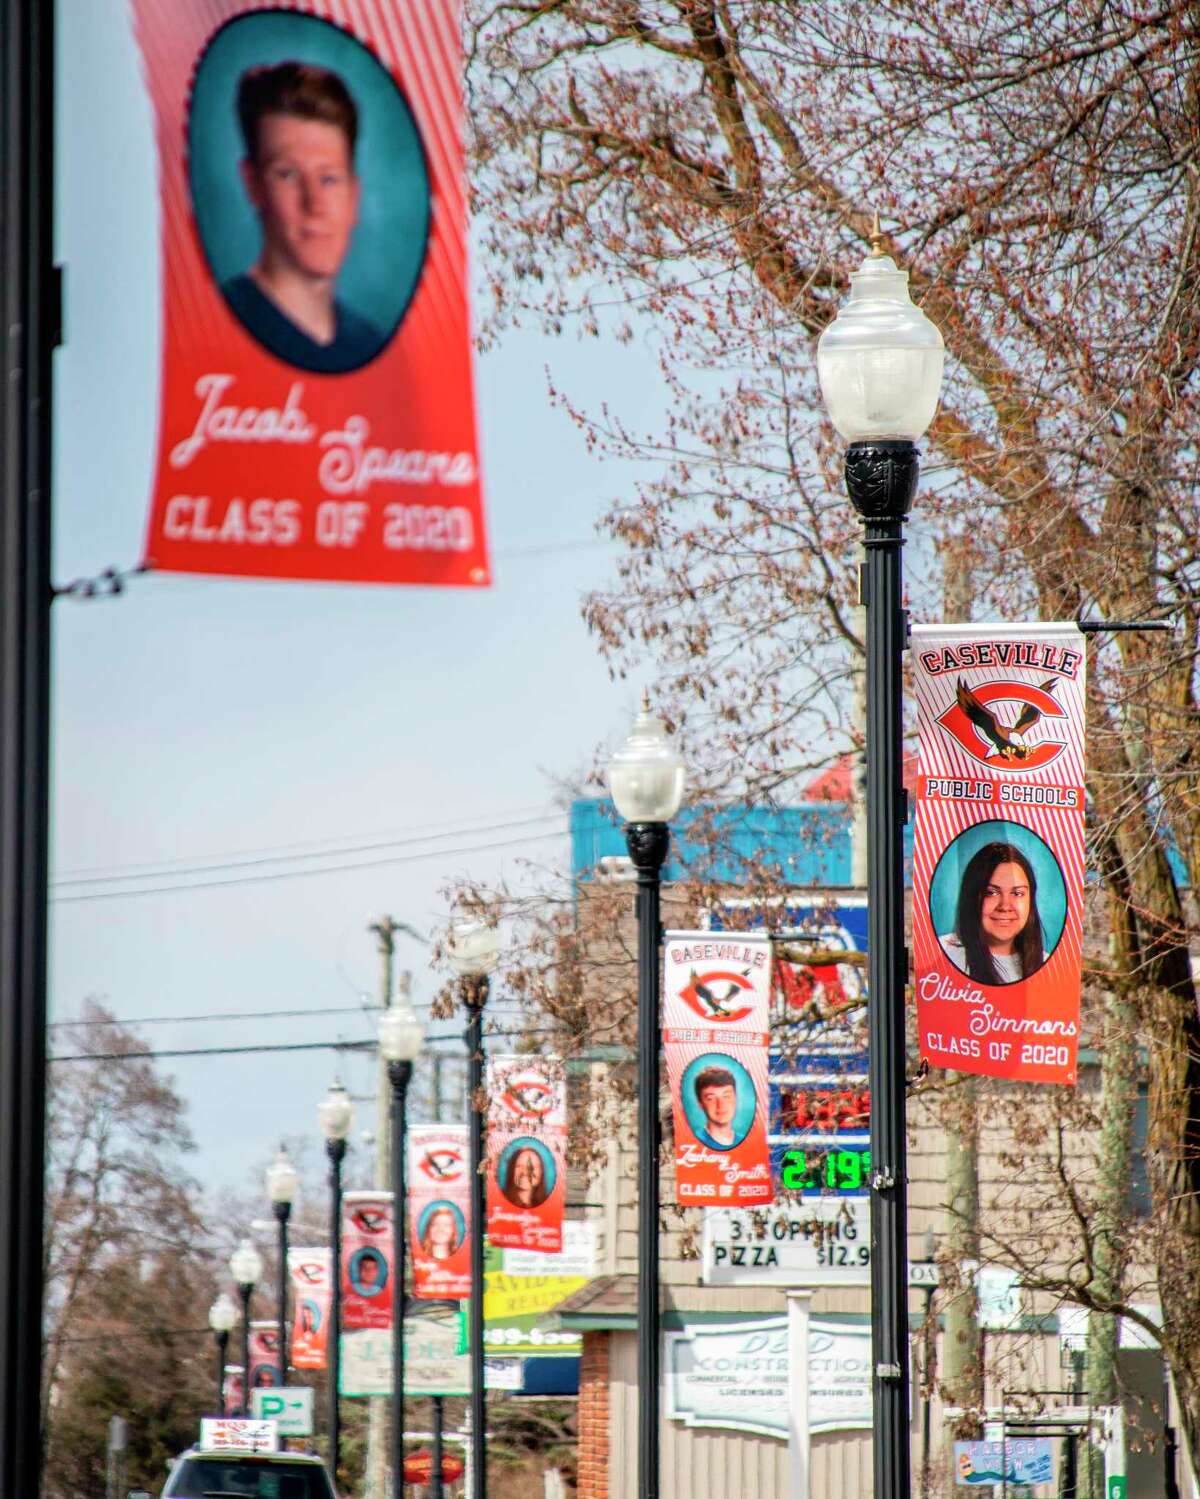 Caseville Public School is honoring the class of 2020 by hanging banners on lamp posts along Main Street featuring the name and photo of each of the school's graduating seniors. (Submitted photo/Jessica Sancrant)